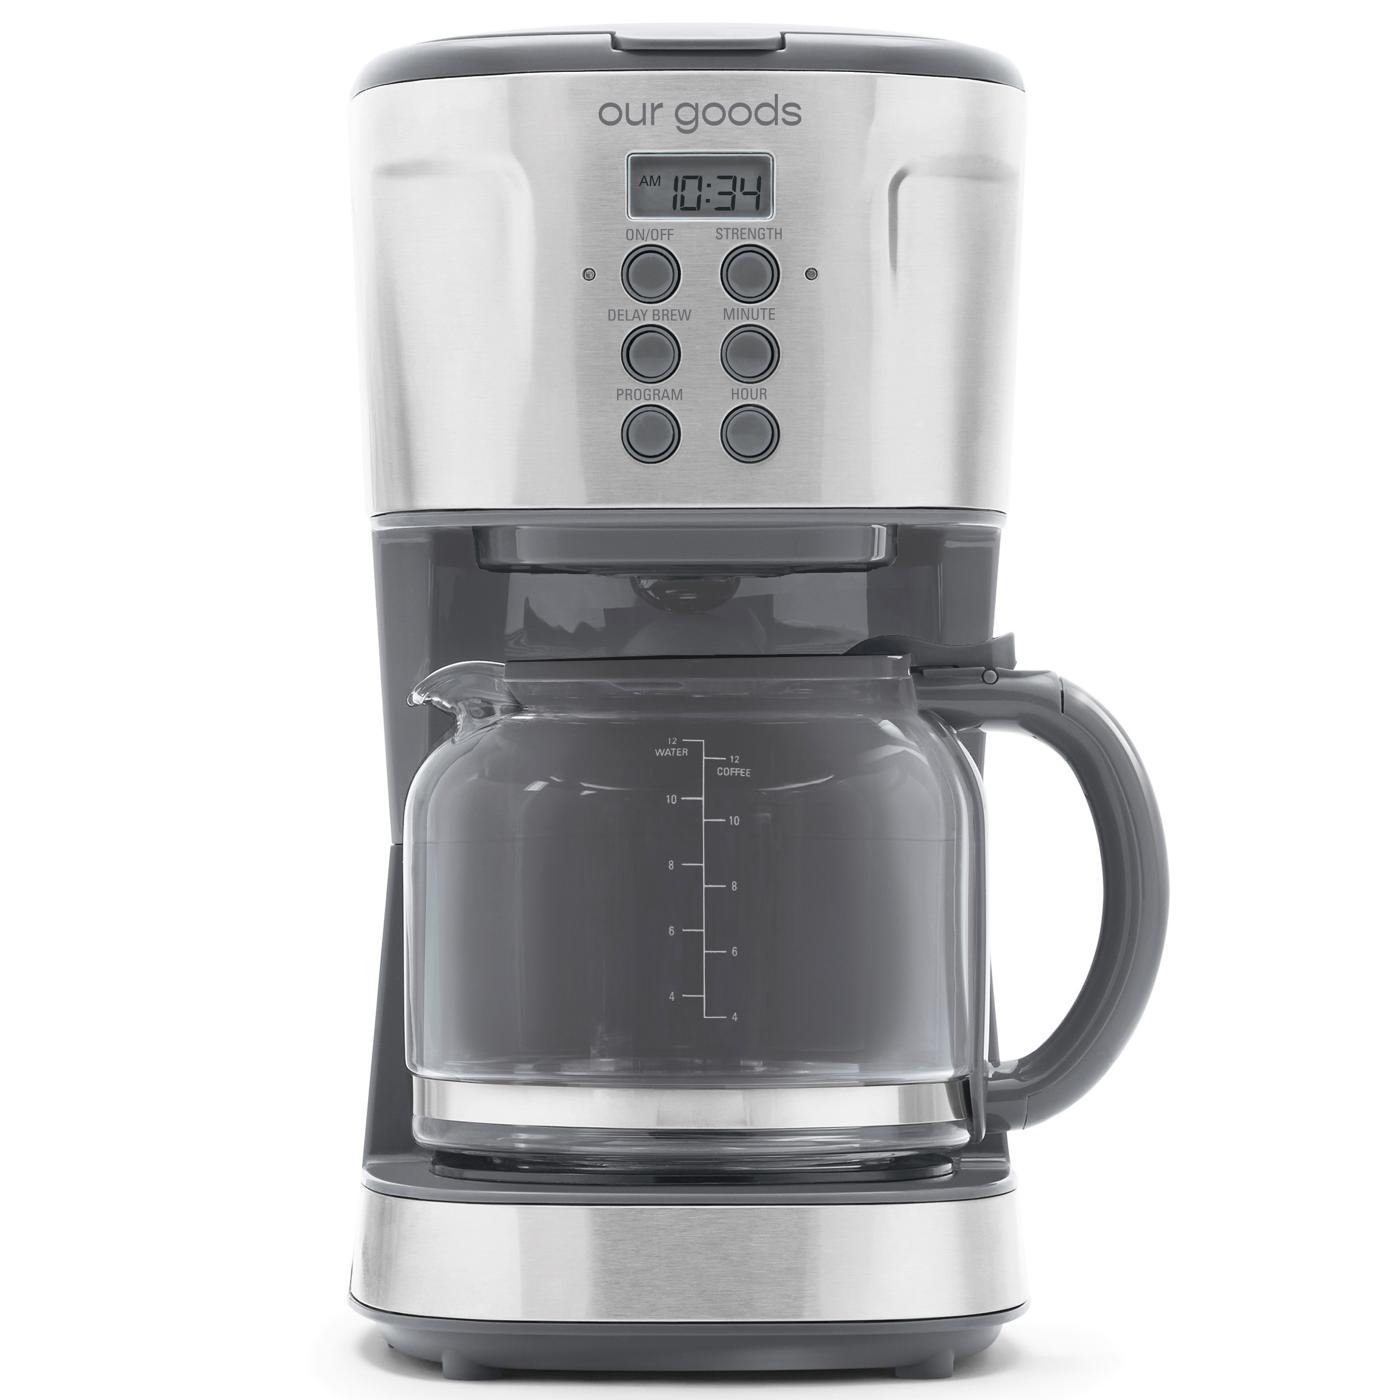 our goods Programmable Coffee Maker - Pebble Gray; image 2 of 5